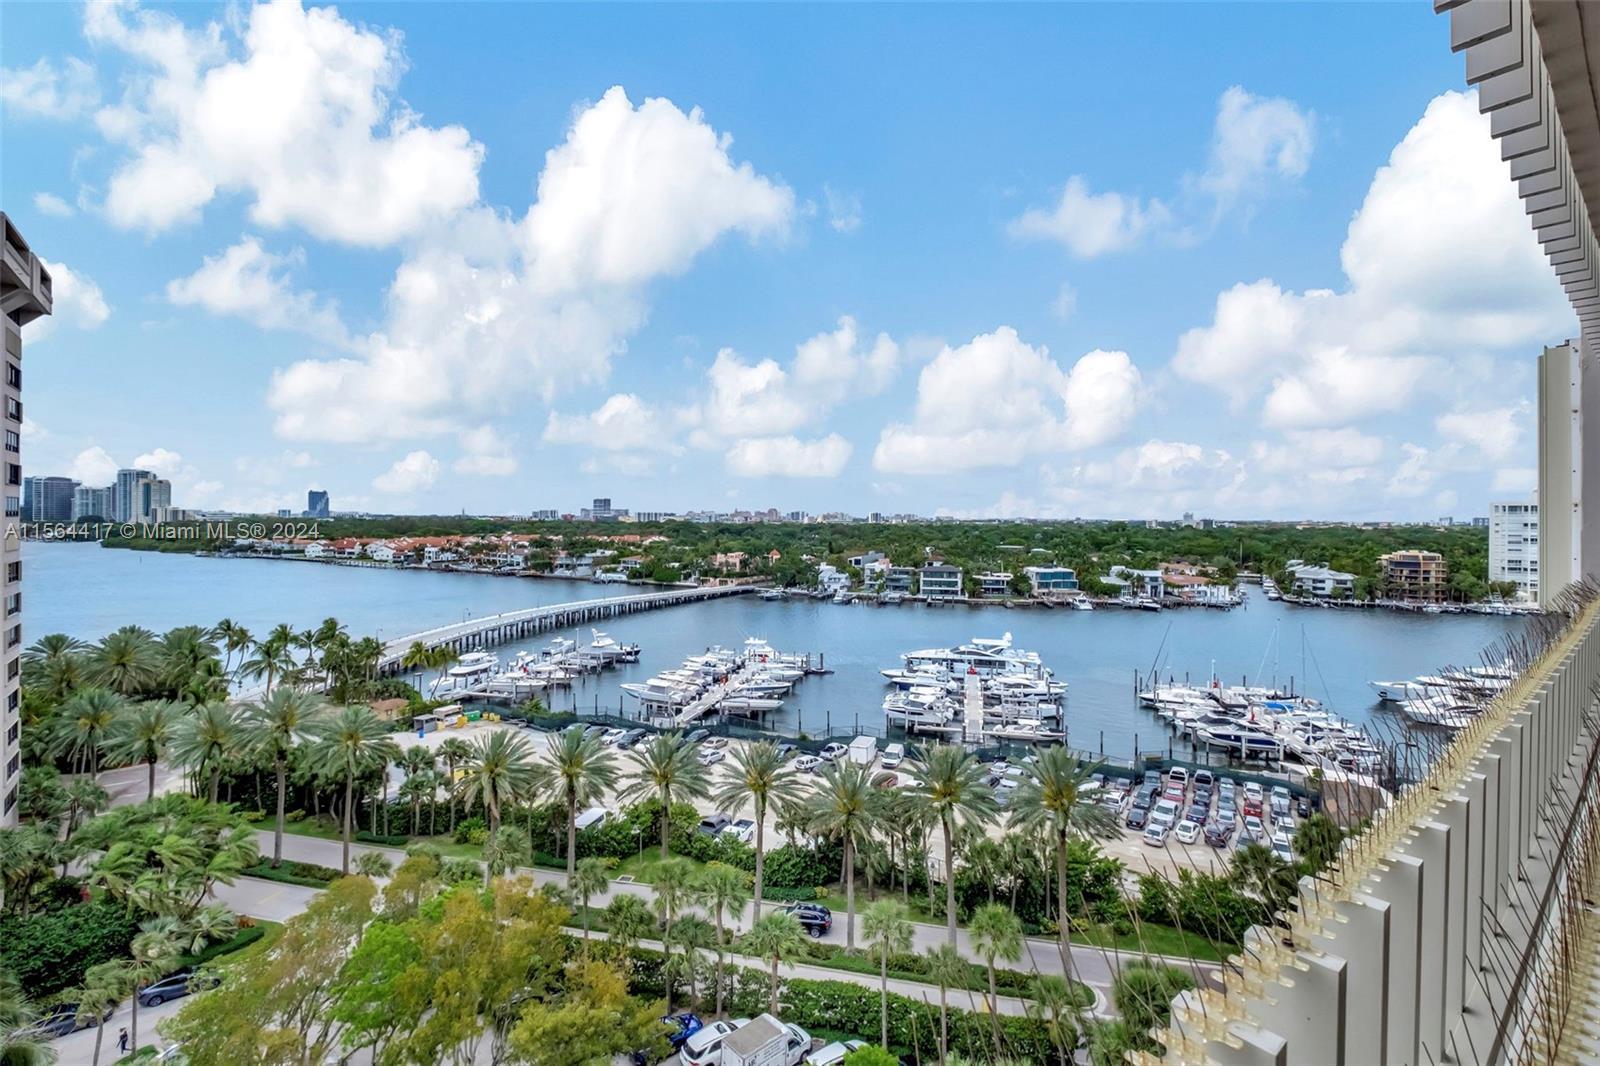 Lovely 2bd/2ba situated in a tropical, 20 acre private island, surrounded by Biscayne Bay, just off 